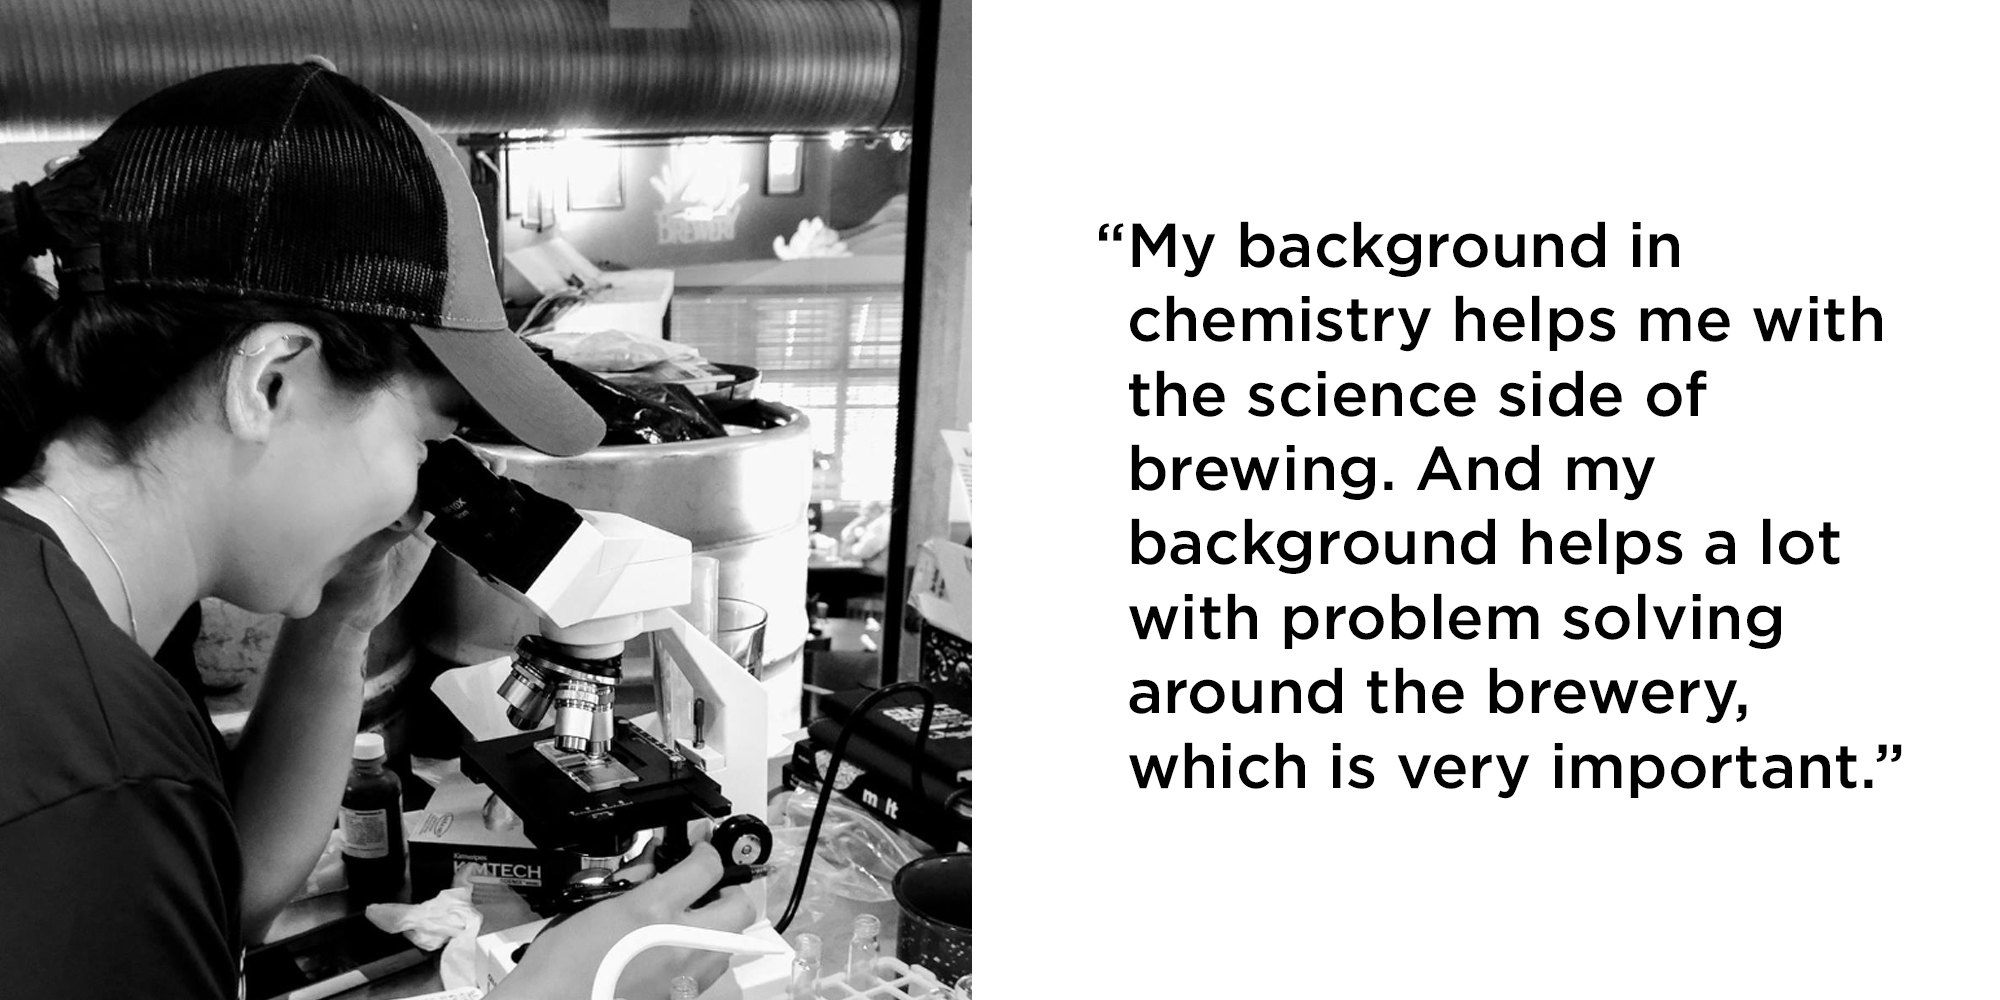 “My background in chemistry helps me with the science side of brewing. And my background helps a lot with problem solving around the brewery, which is very important.”